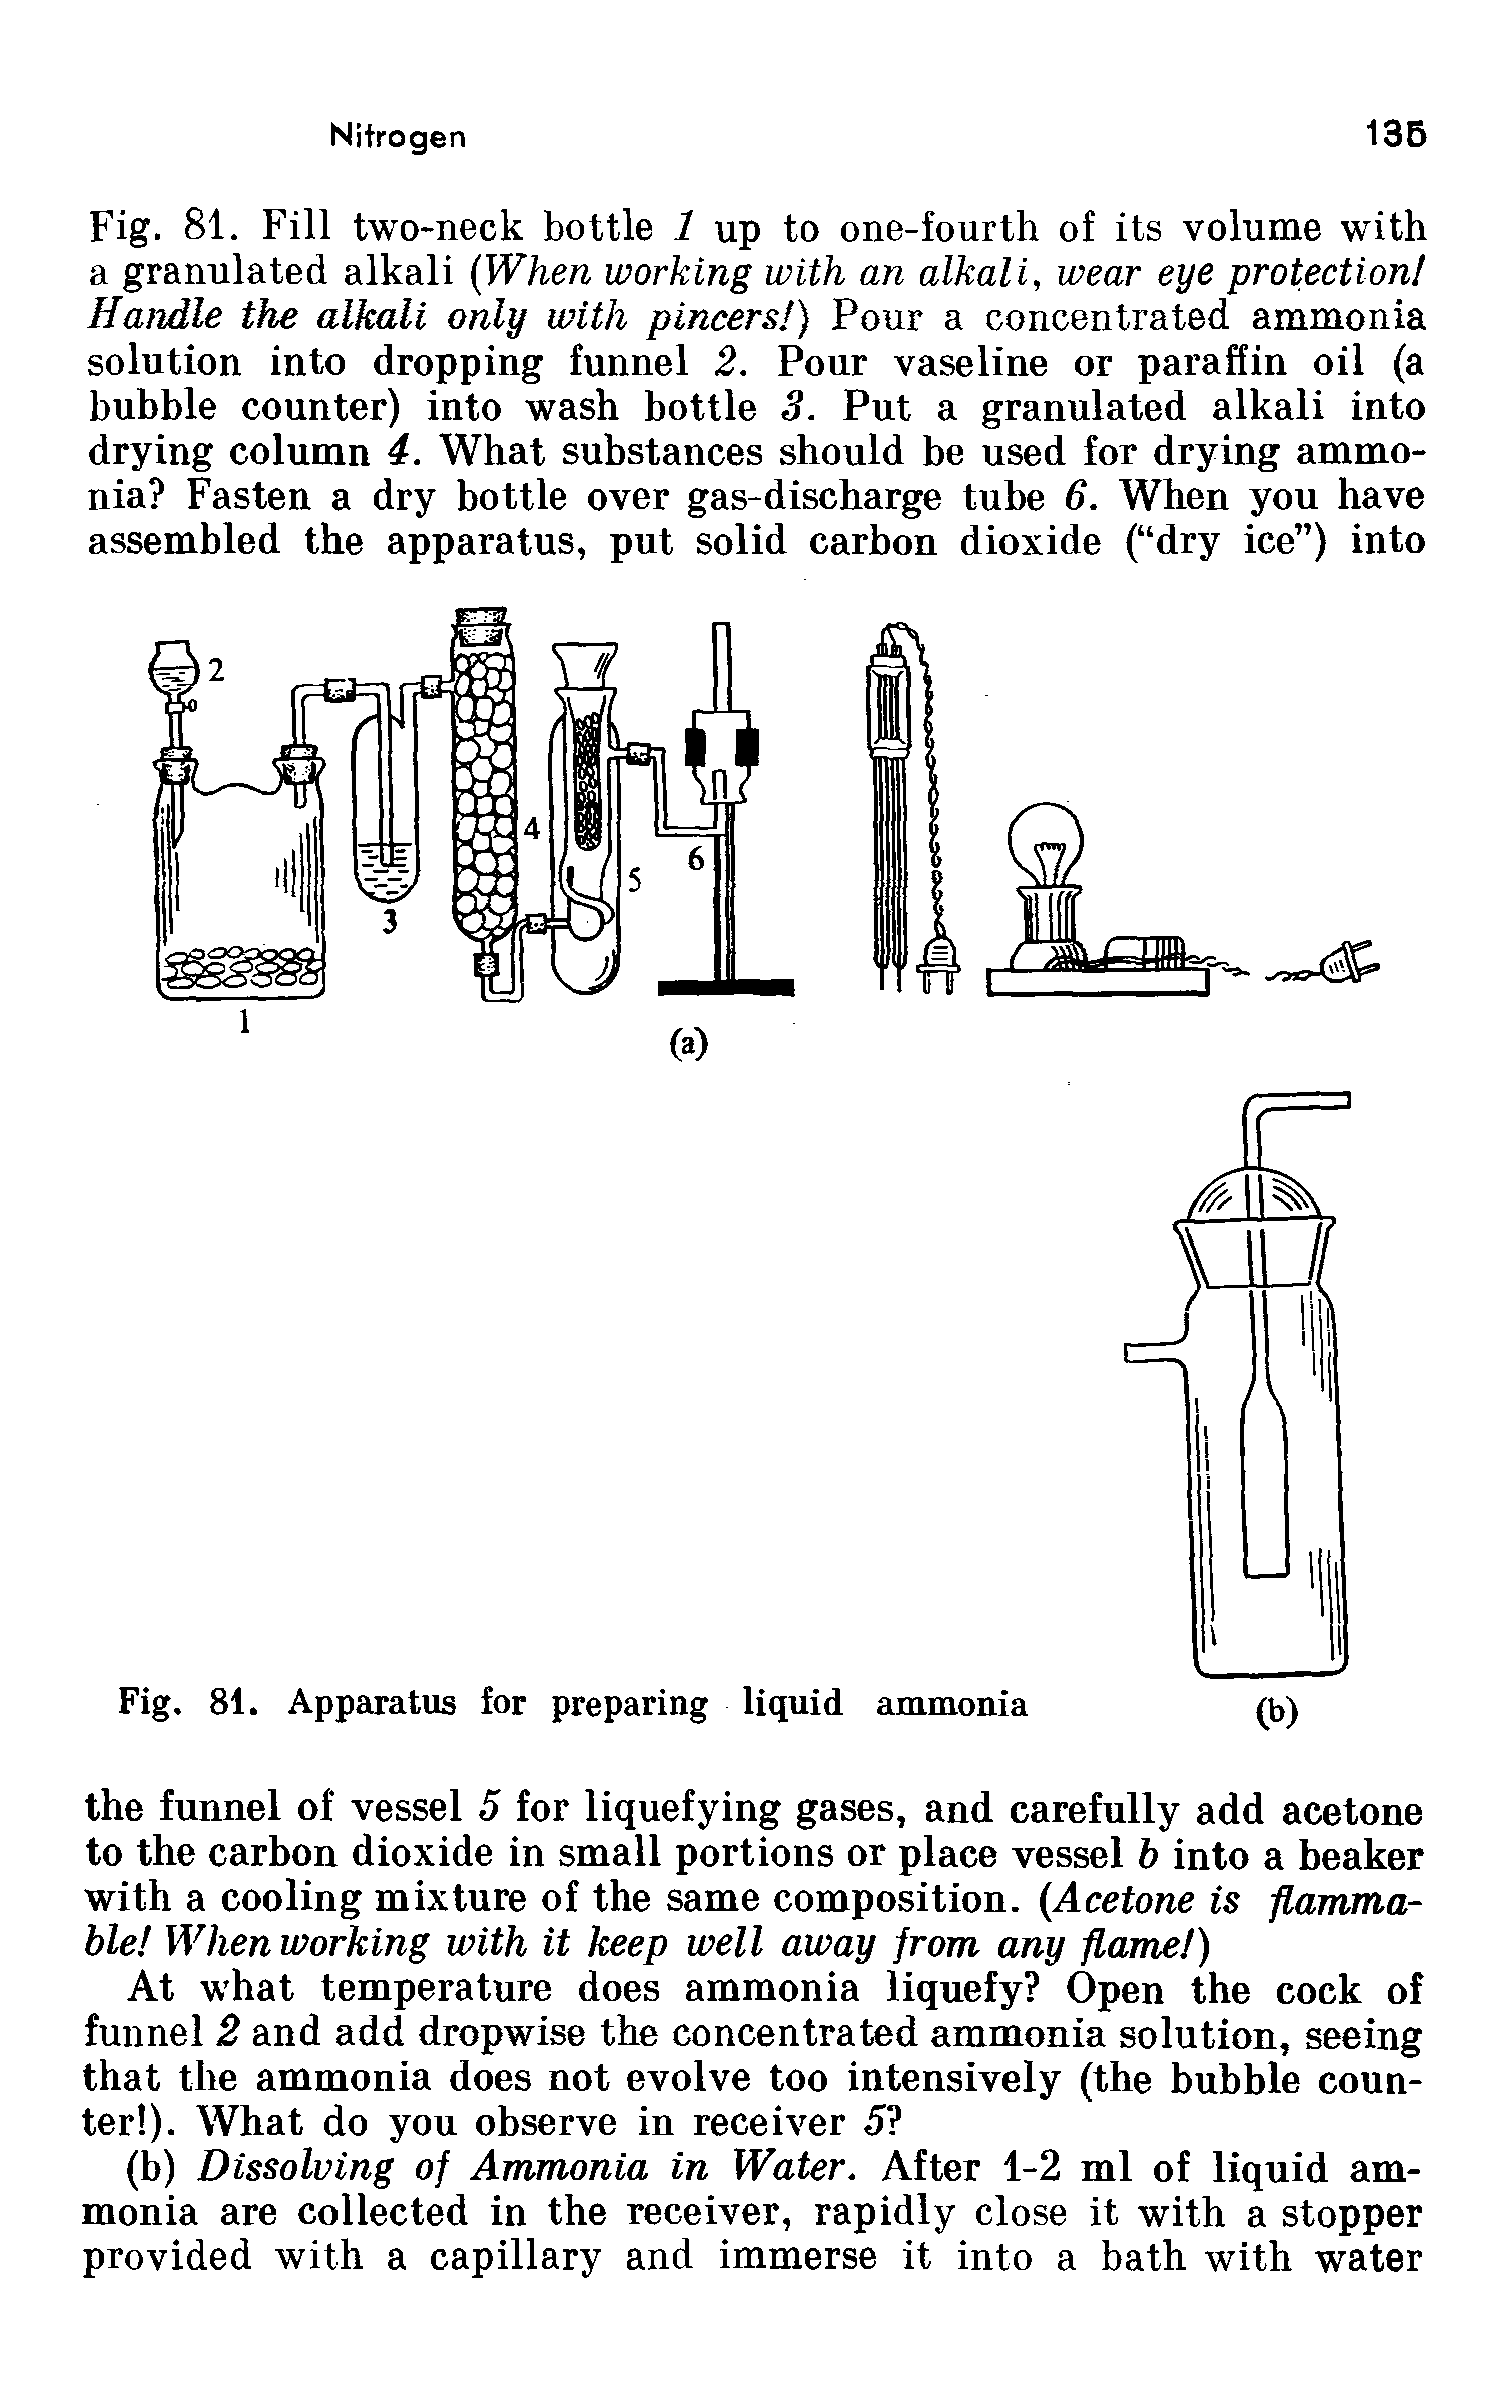 Fig. 81. Fill two-neck bottle 1 up to one-fourth of its volume with a granulated alkali (IV/ten working with an alkali, wear eye protection Handle the alkali only with pincers ) Pour a concentrated ammonia solution into dropping funnel 2. Pour vaseline or paraffin oil (a bubble counter) into wash bottle 3. Put a granulated alkali into drying column 4. What substances should be used for drying ammonia Fasten a dry bottle over gas-discharge tube 6. When you have assembled the apparatus, put solid carbon dioxide ( dry ice ) into...